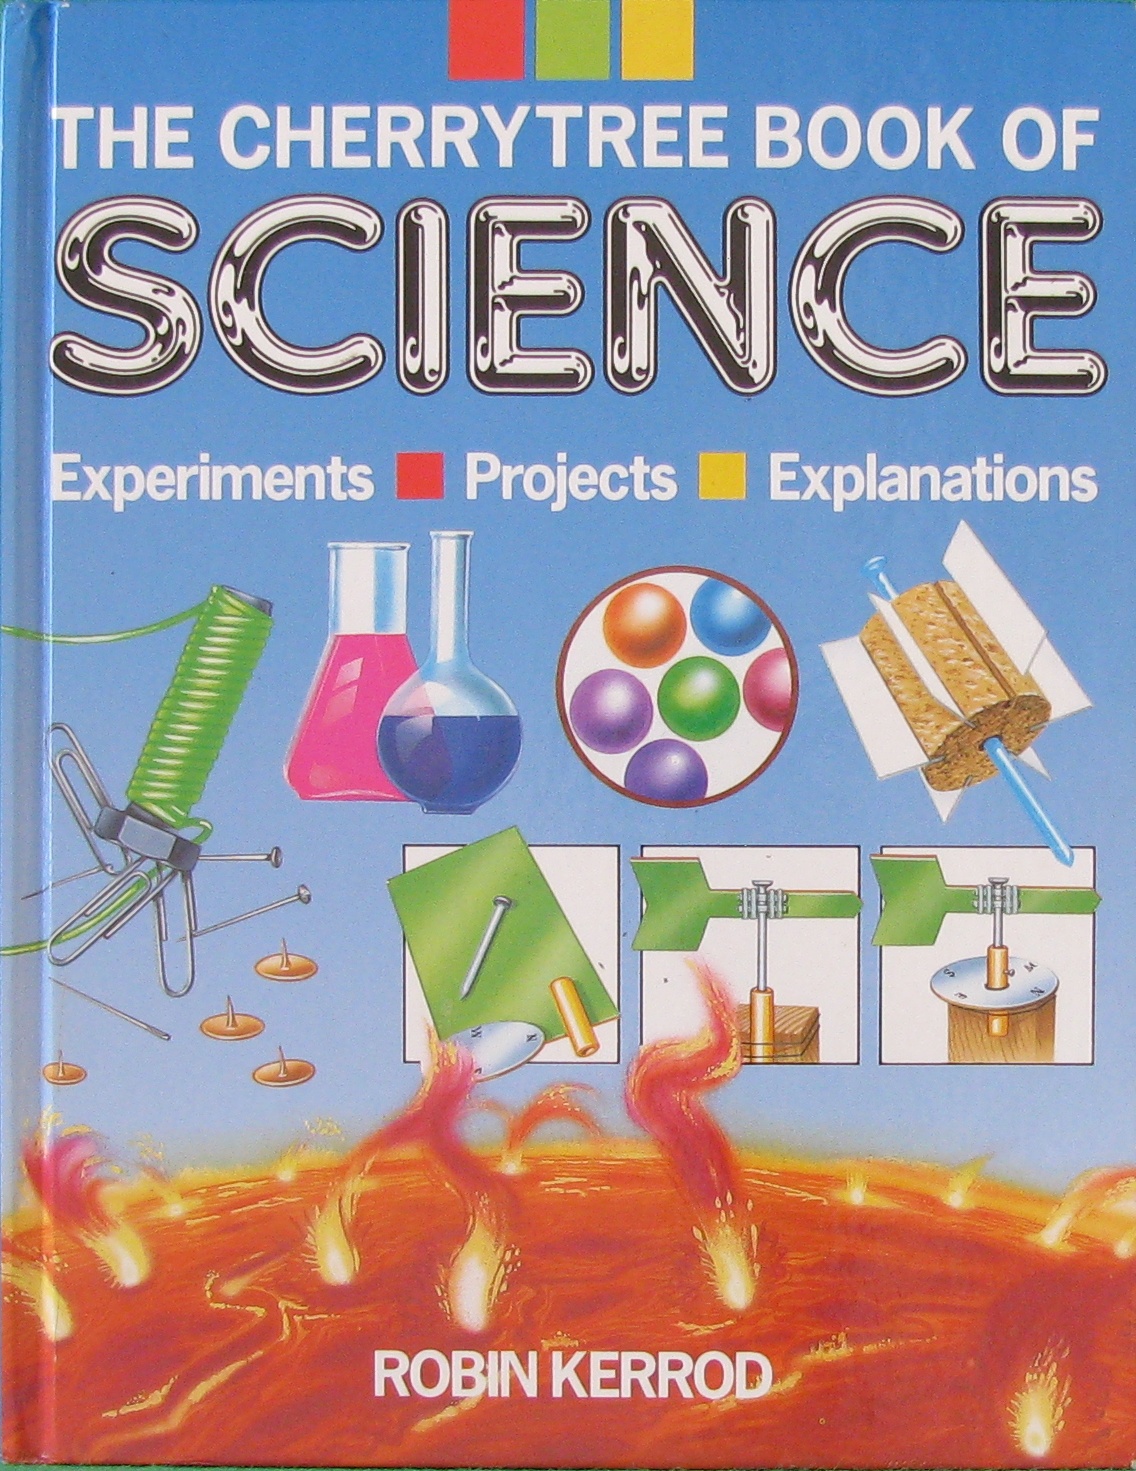 the cherrytree book of science a cherrytree book